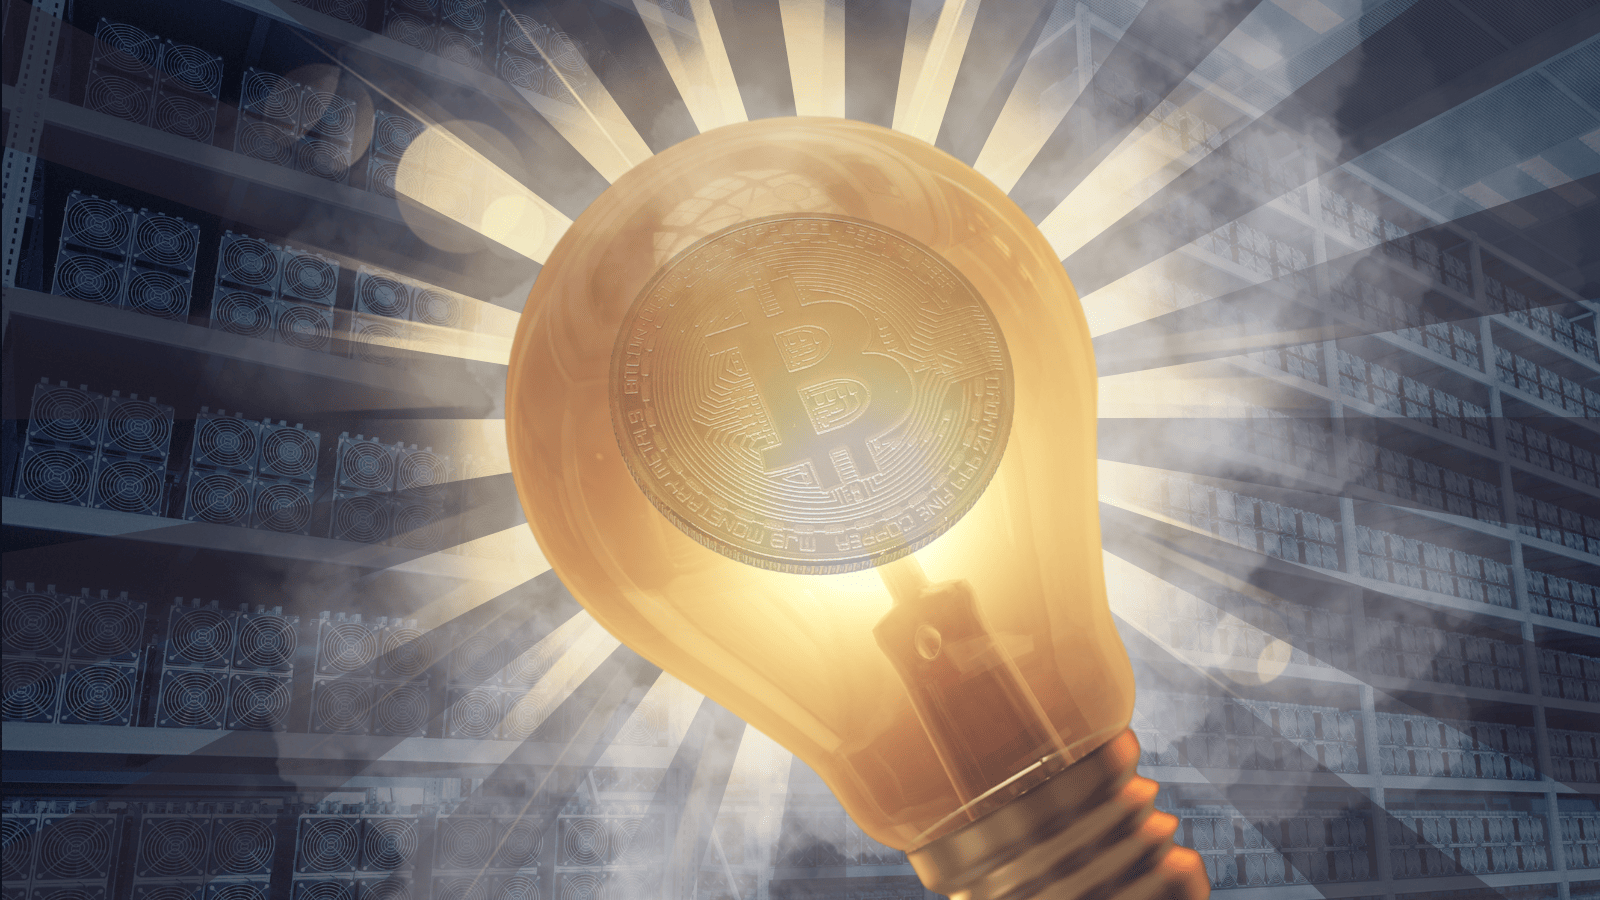 Innovations in Sustainable Mining Paves Way for Future of Bitcoin